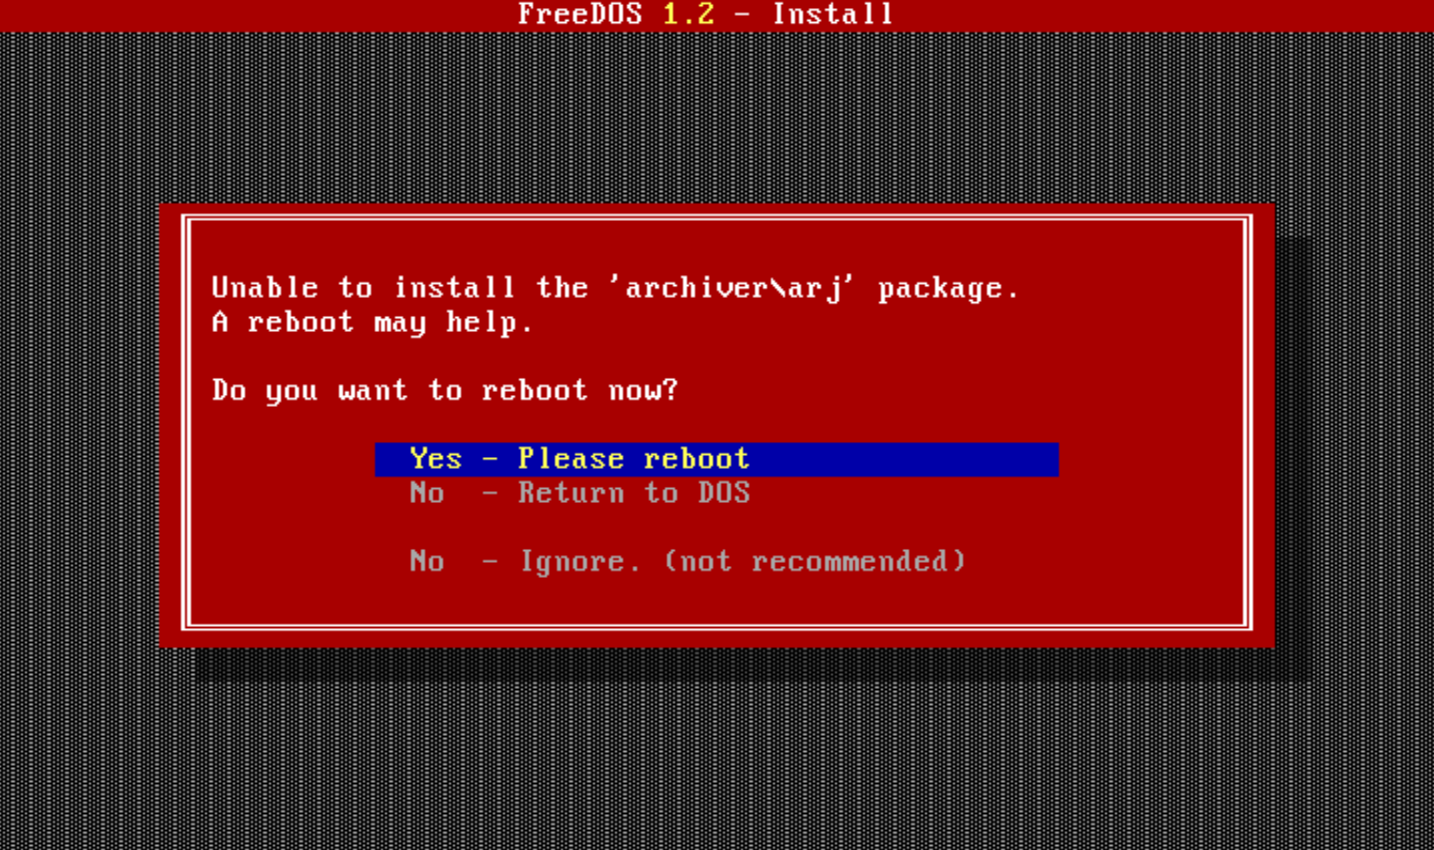 FreeDOS Install failure if package previously installed